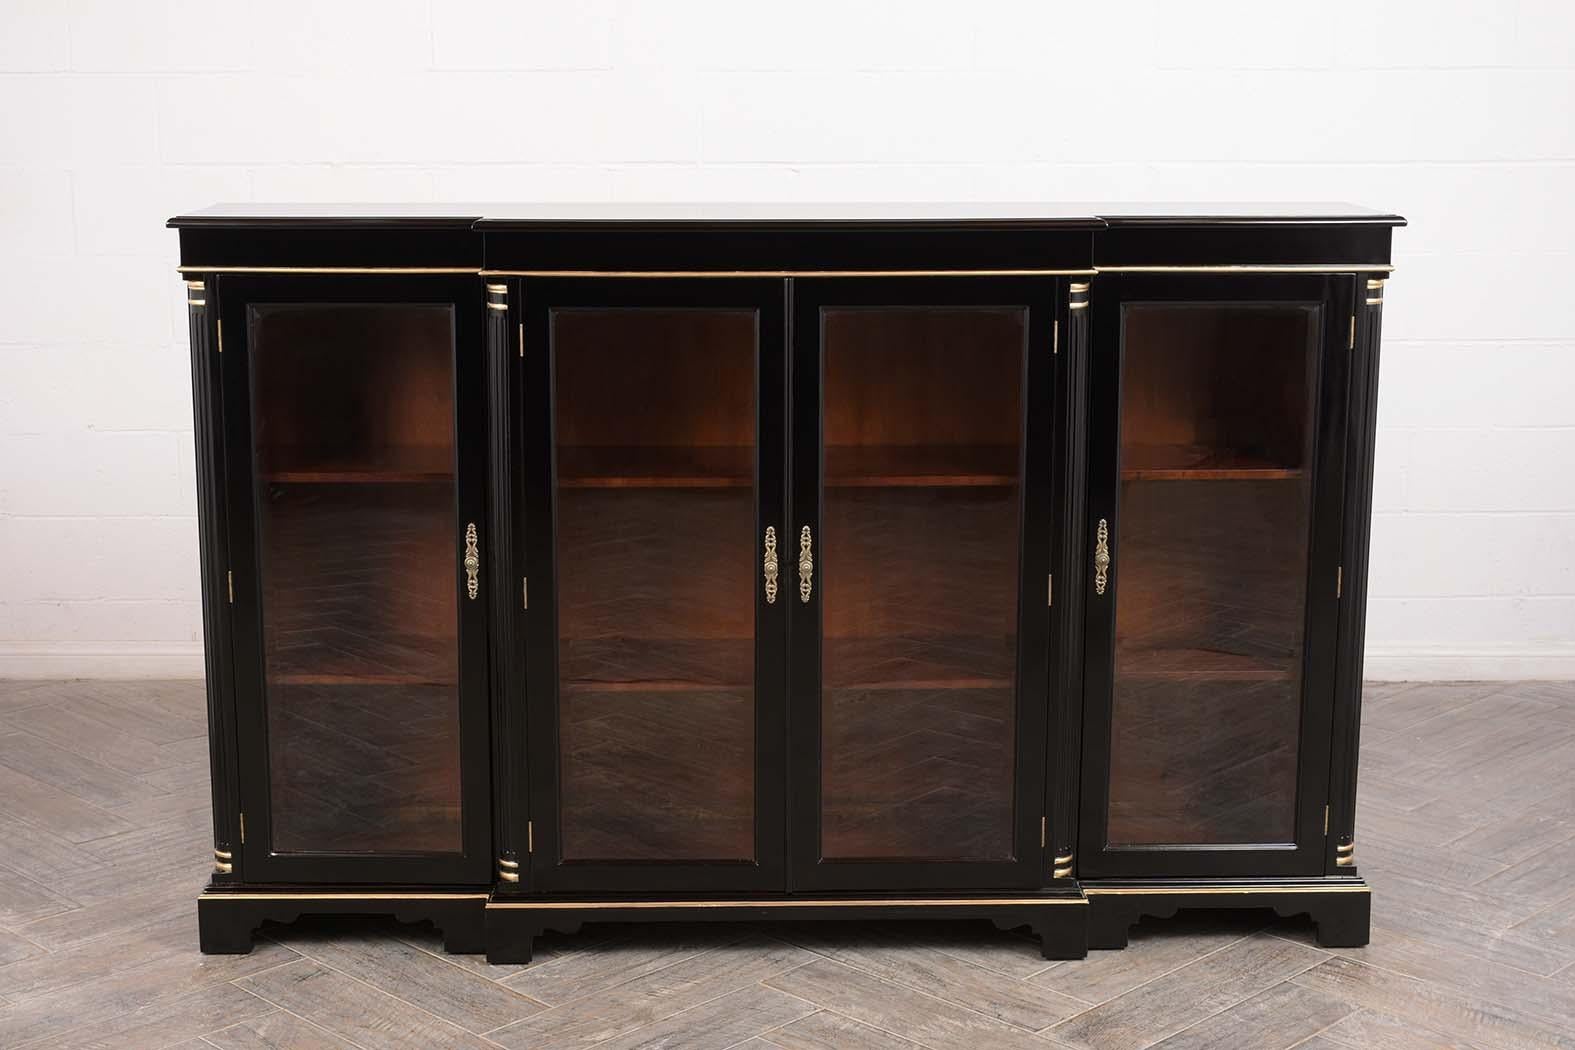 European Four Doors Regency Style Bookcase with a Black Lacquered Finish